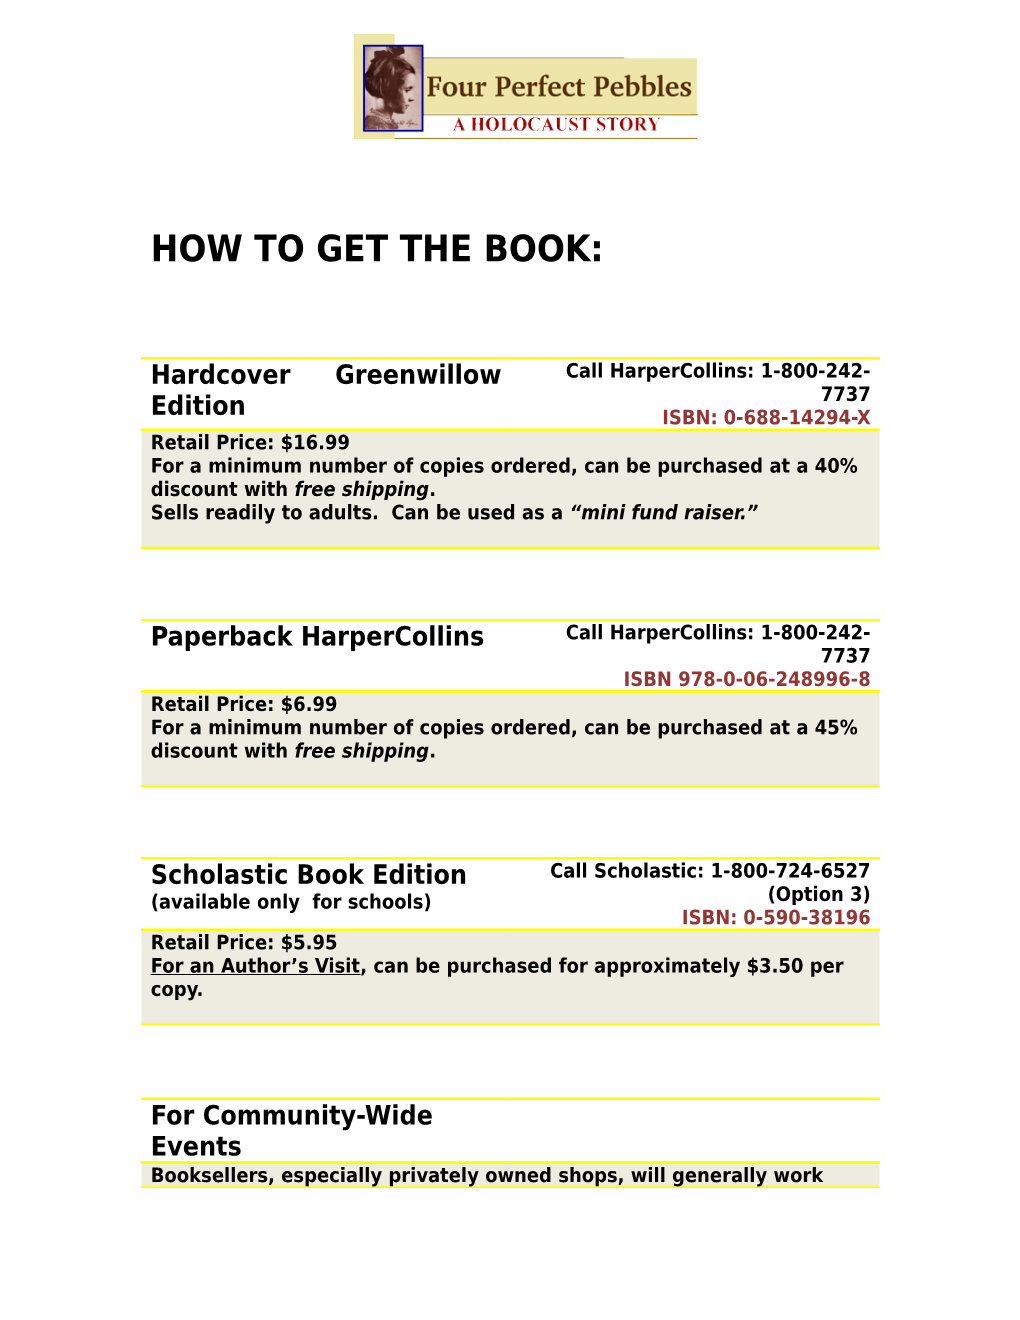 How to Get the Book